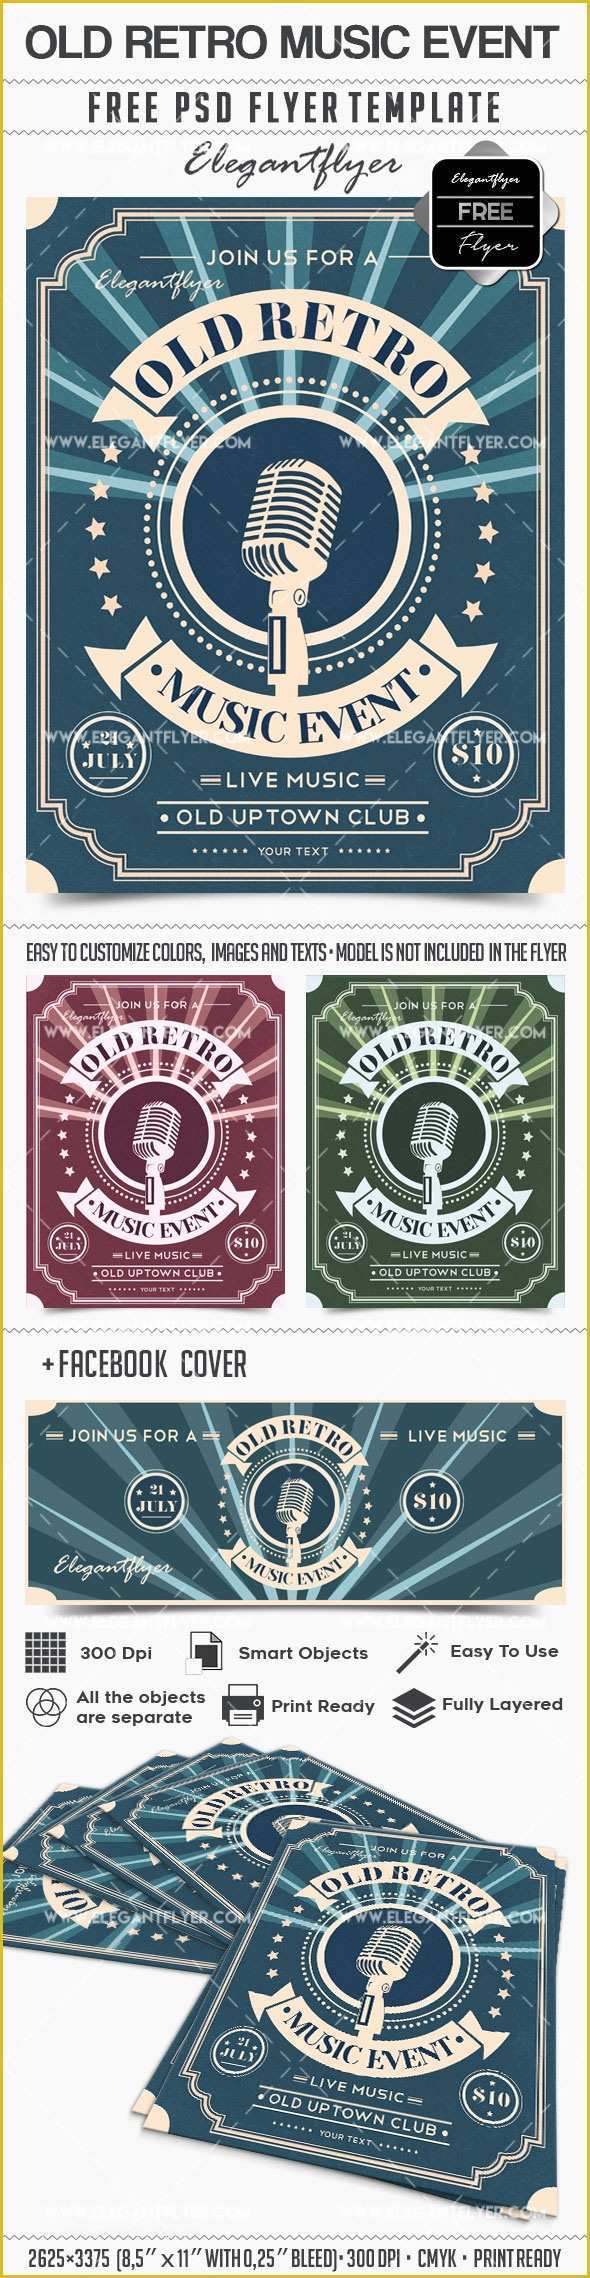 Free Music event Flyer Templates Of Old Retro Music event – Free Flyer Psd Template – by